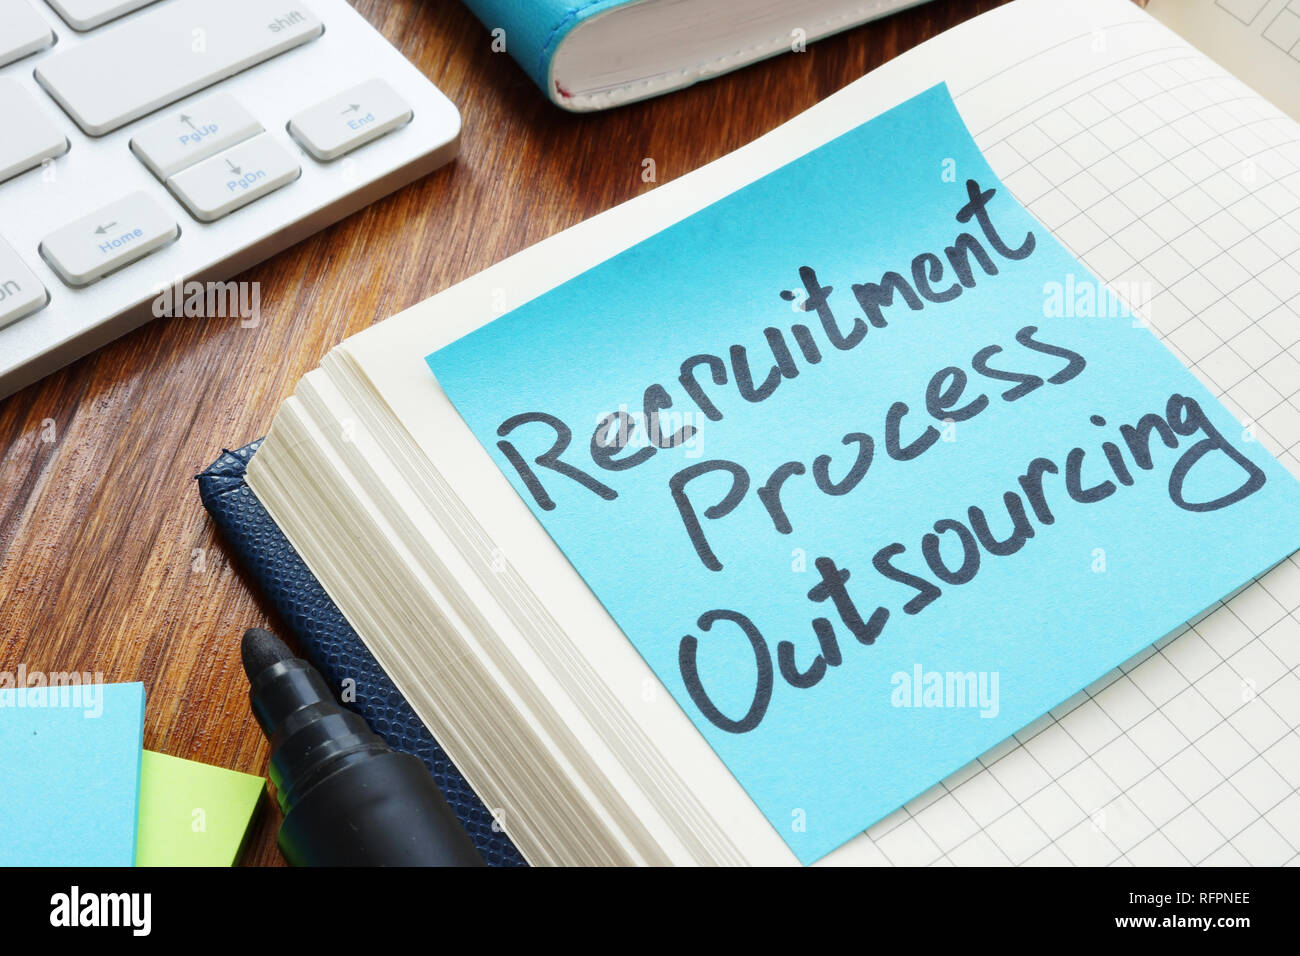 Recruitment process outsourcing RPO written on a piece of paper. Stock Photo